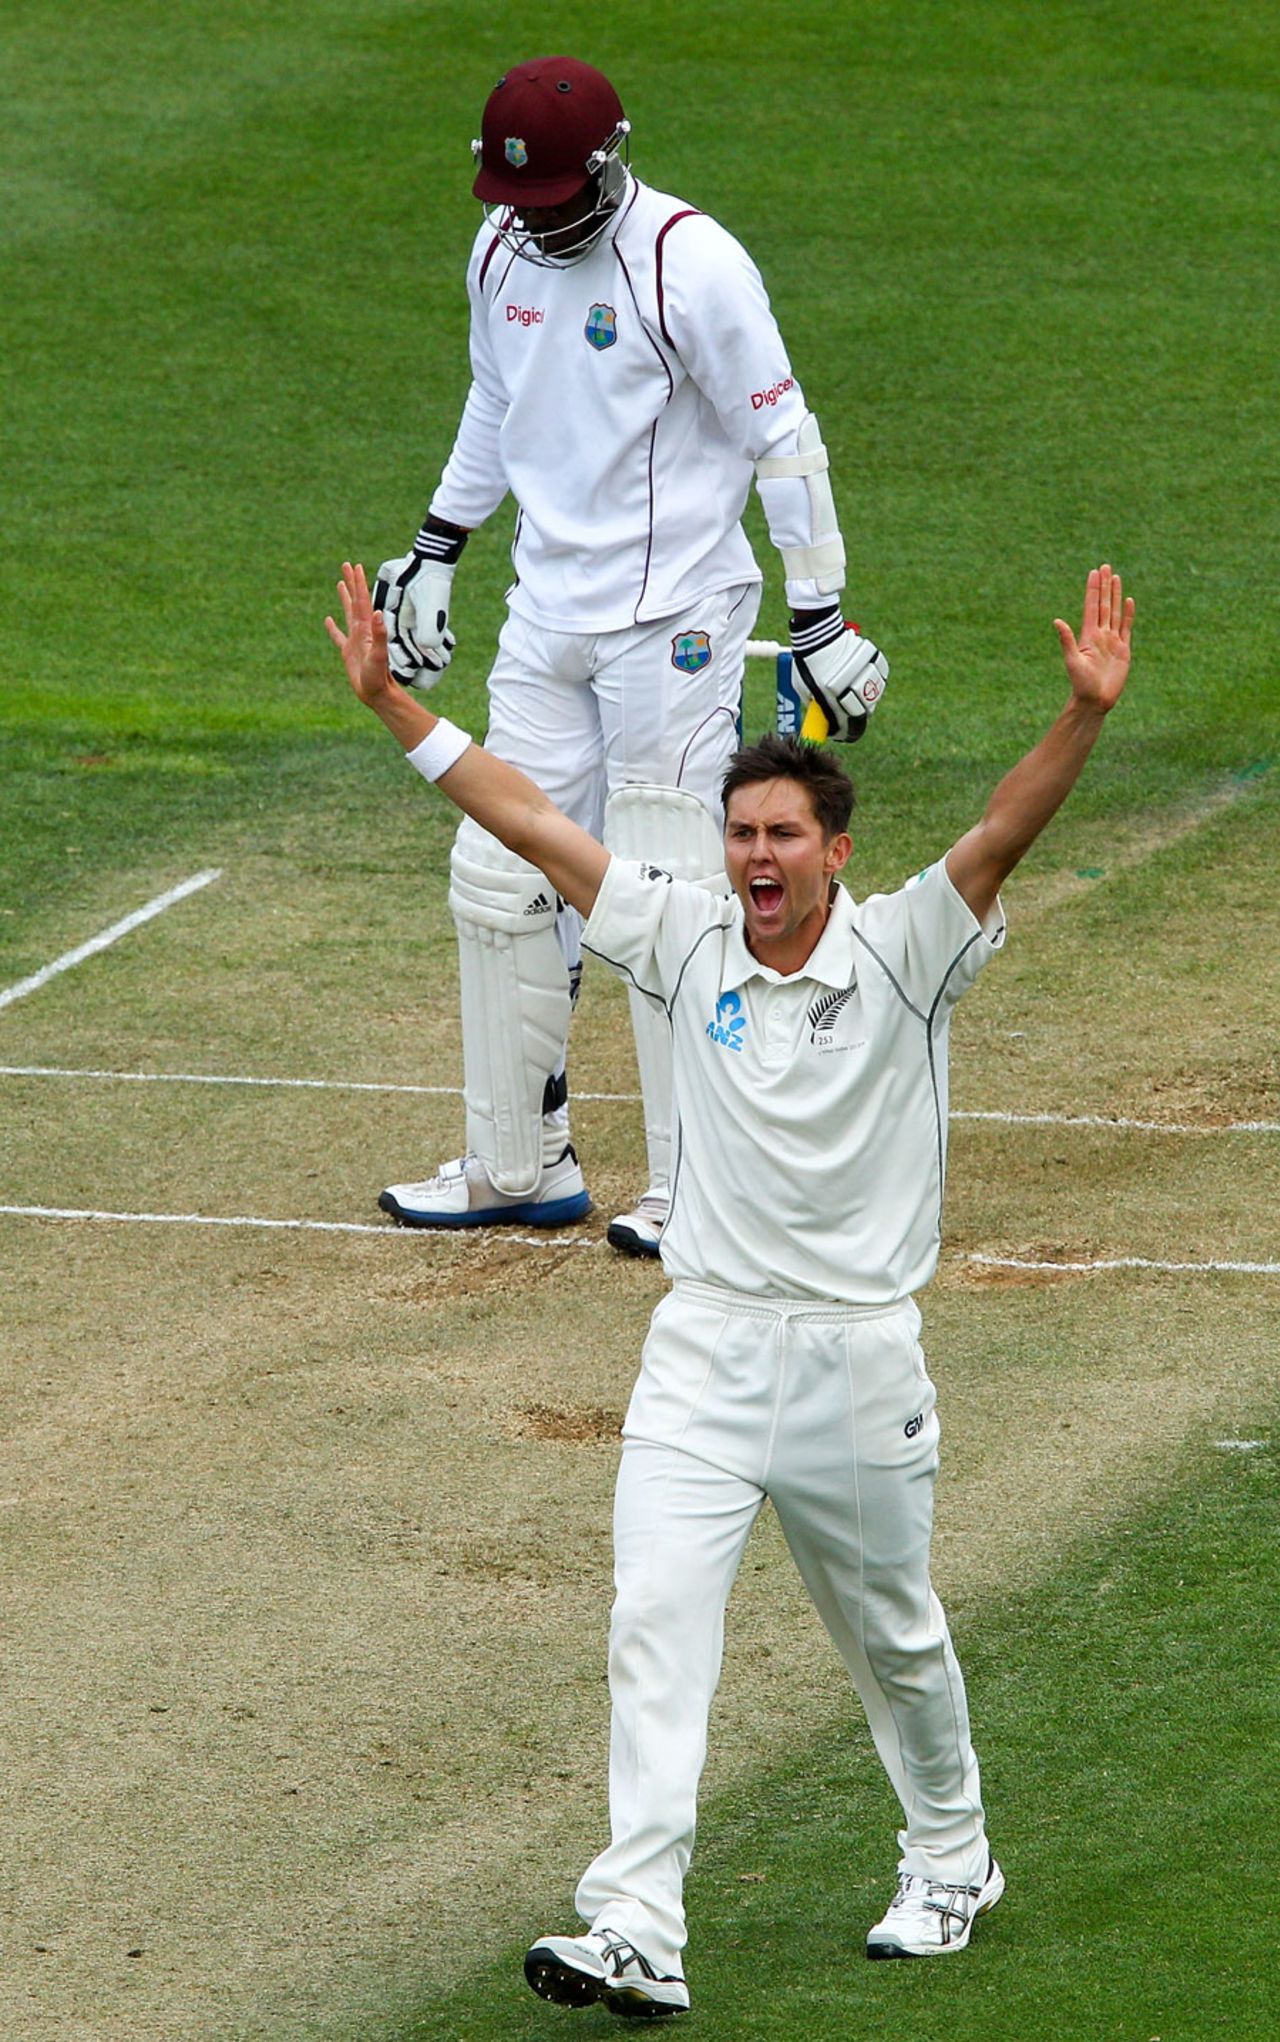 Trent Boult appeals unsuccessfully for the wicket of Kirk Edwards, New Zealand v West Indies, 2nd Test, Wellington, 2nd day, December 12, 2013